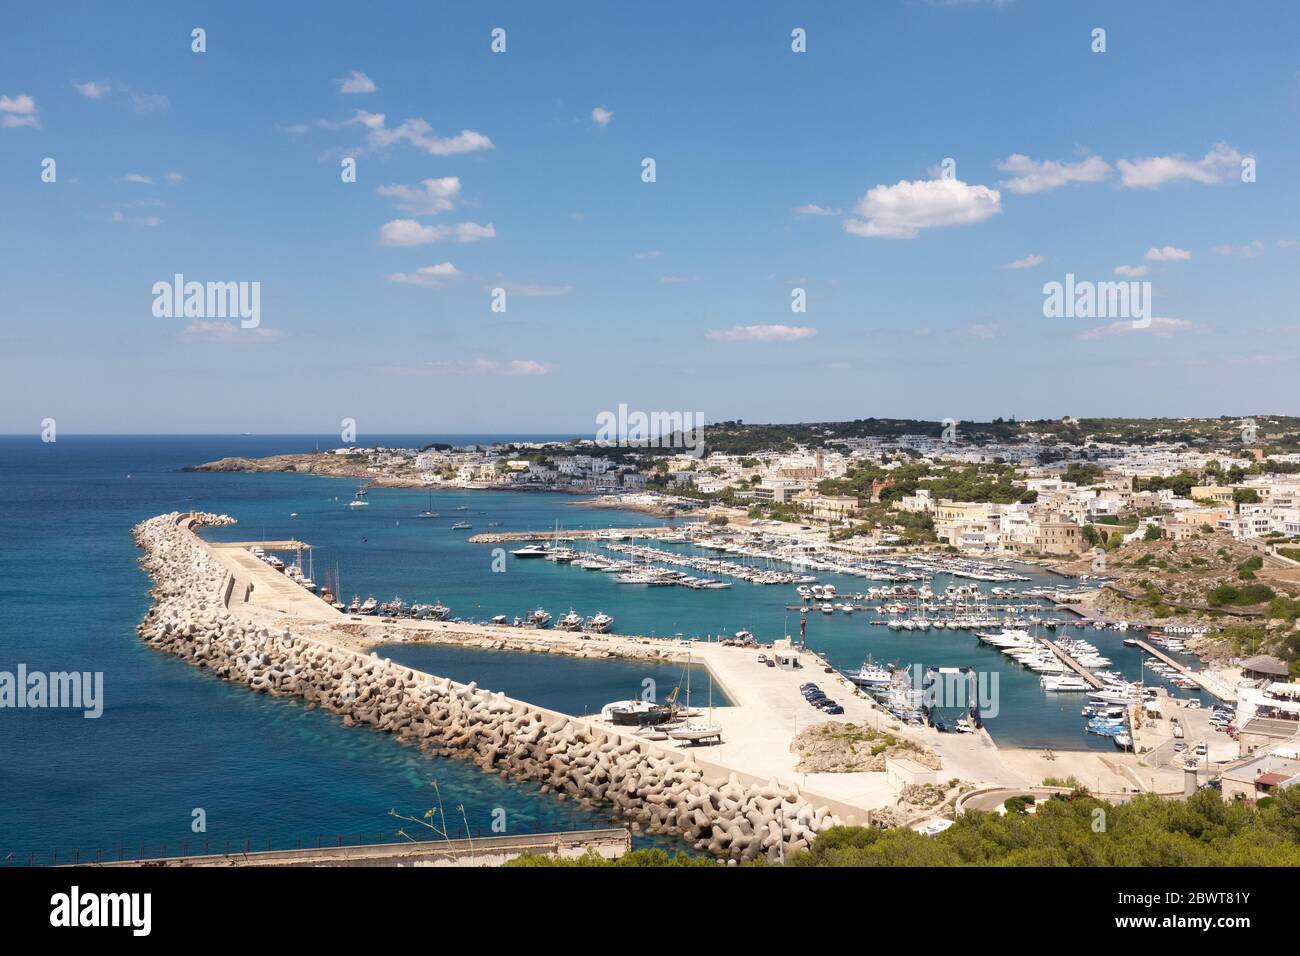 We are in southern Italy in Santa Maria di Leuca, Finibus Terrae, where the Italian peninsula ends, seen from the top of the marina with boats moored. Stock Photo